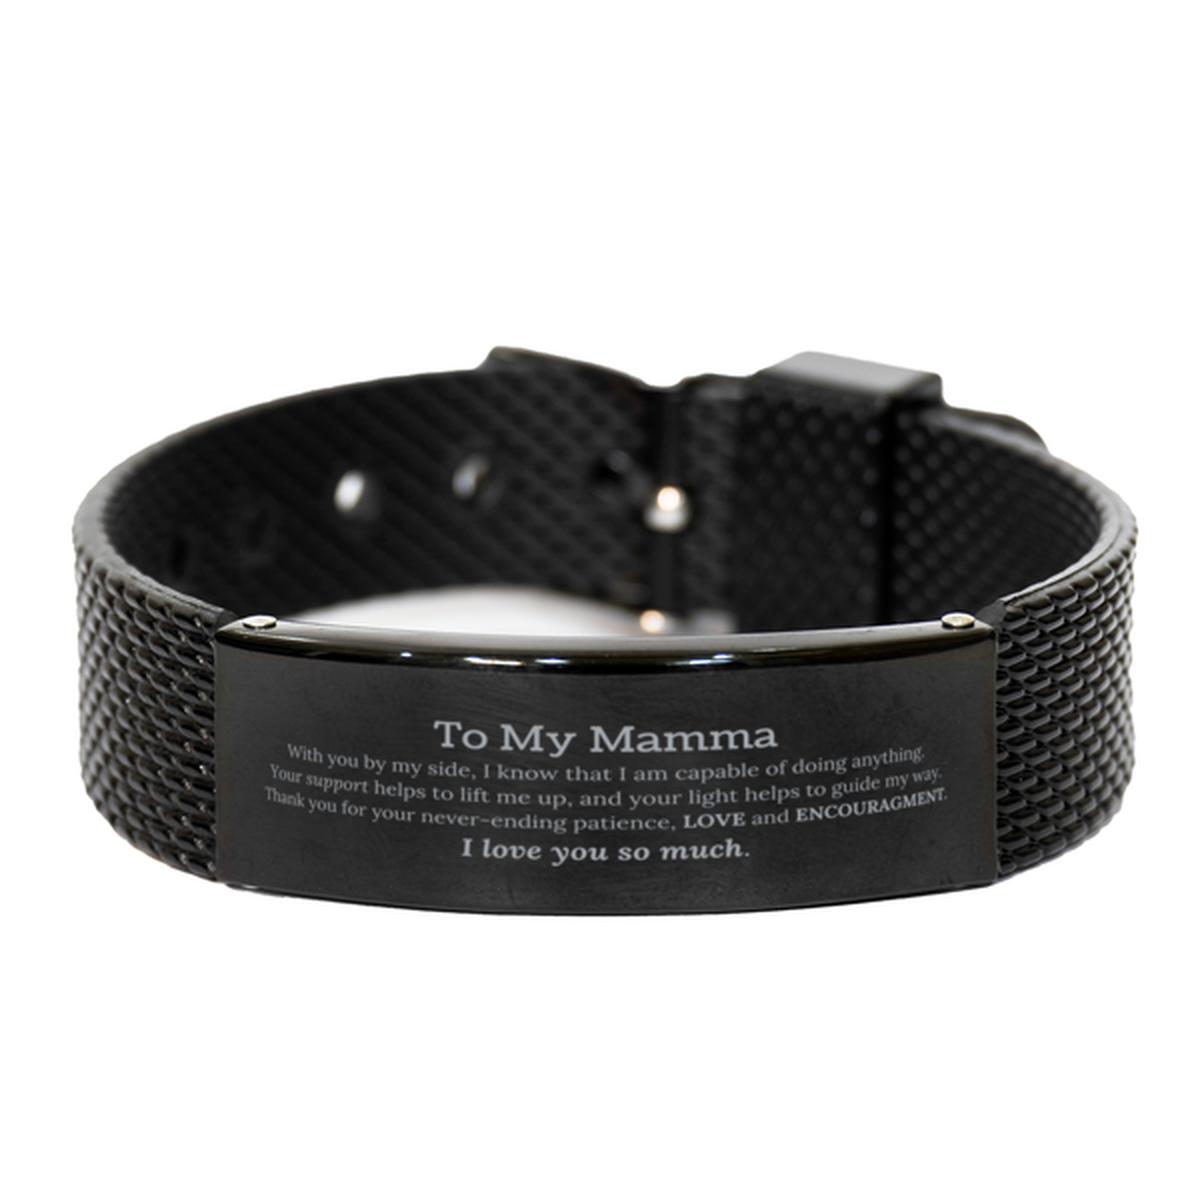 Appreciation Mamma Black Shark Mesh Bracelet Gifts, To My Mamma Birthday Christmas Wedding Keepsake Gifts for Mamma With you by my side, I know that I am capable of doing anything. I love you so much